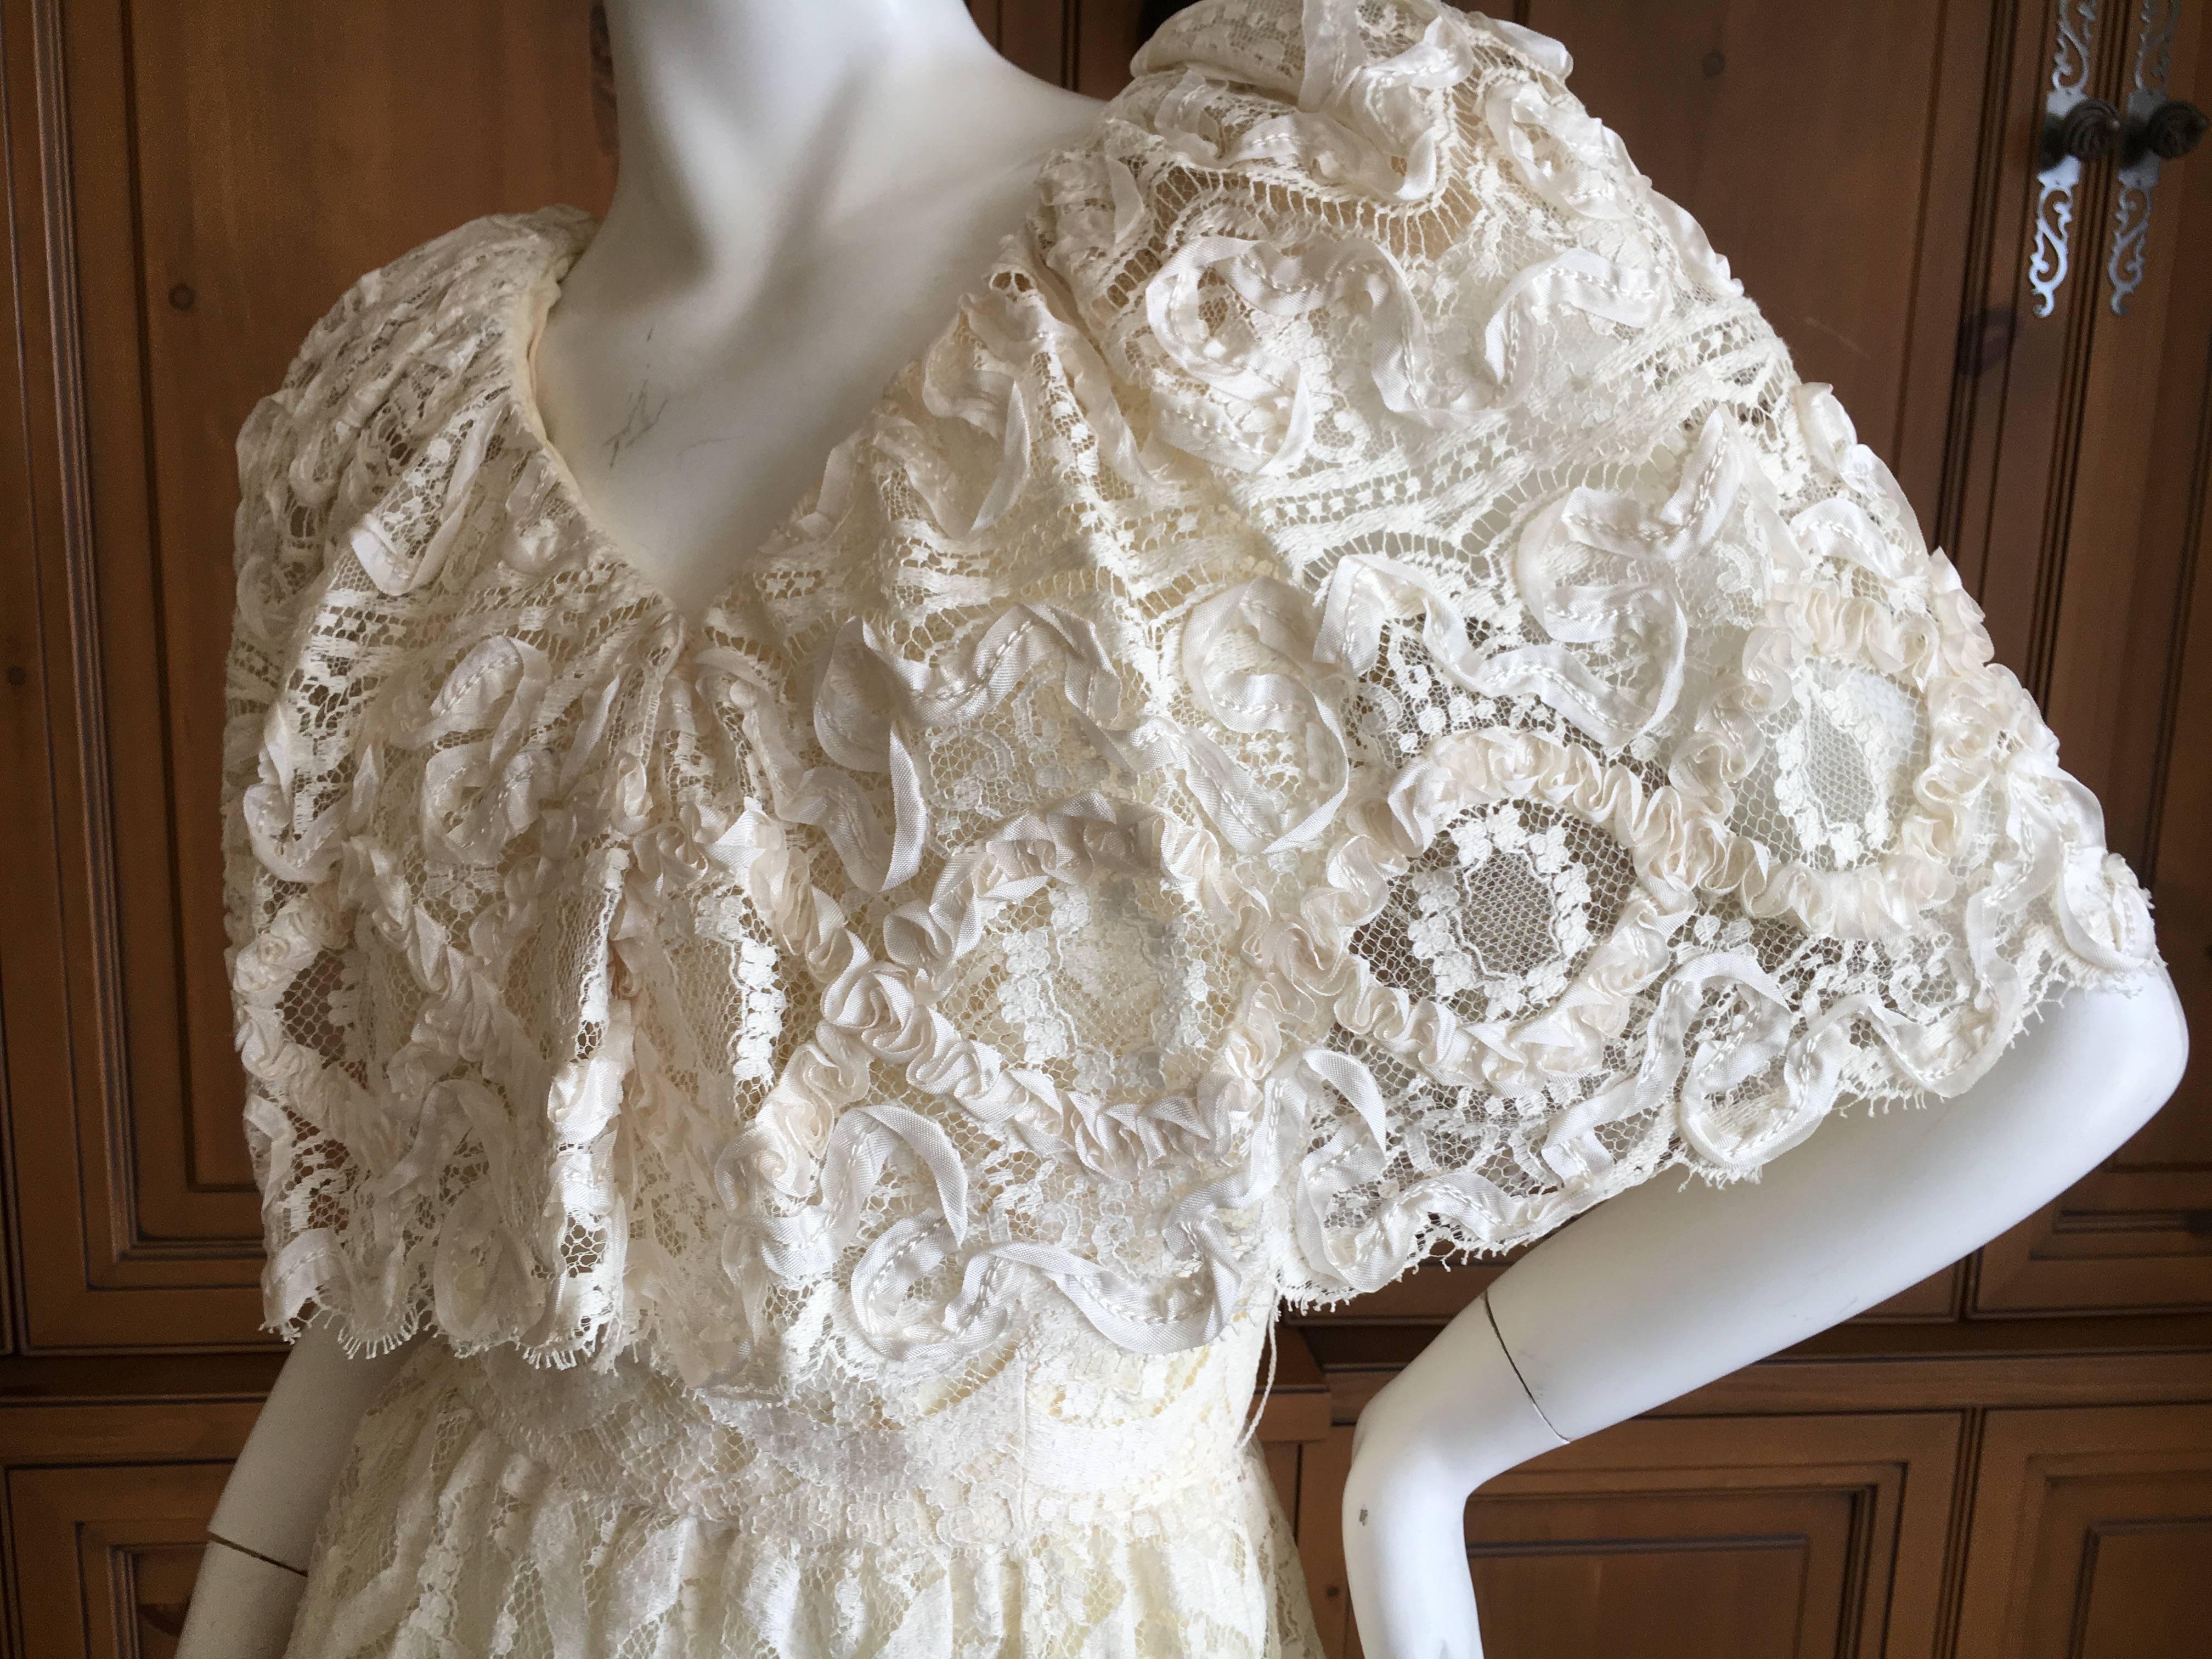 Cream Lace Cape Collar Dress from Morton Myles for the Warrens In Excellent Condition For Sale In Cloverdale, CA